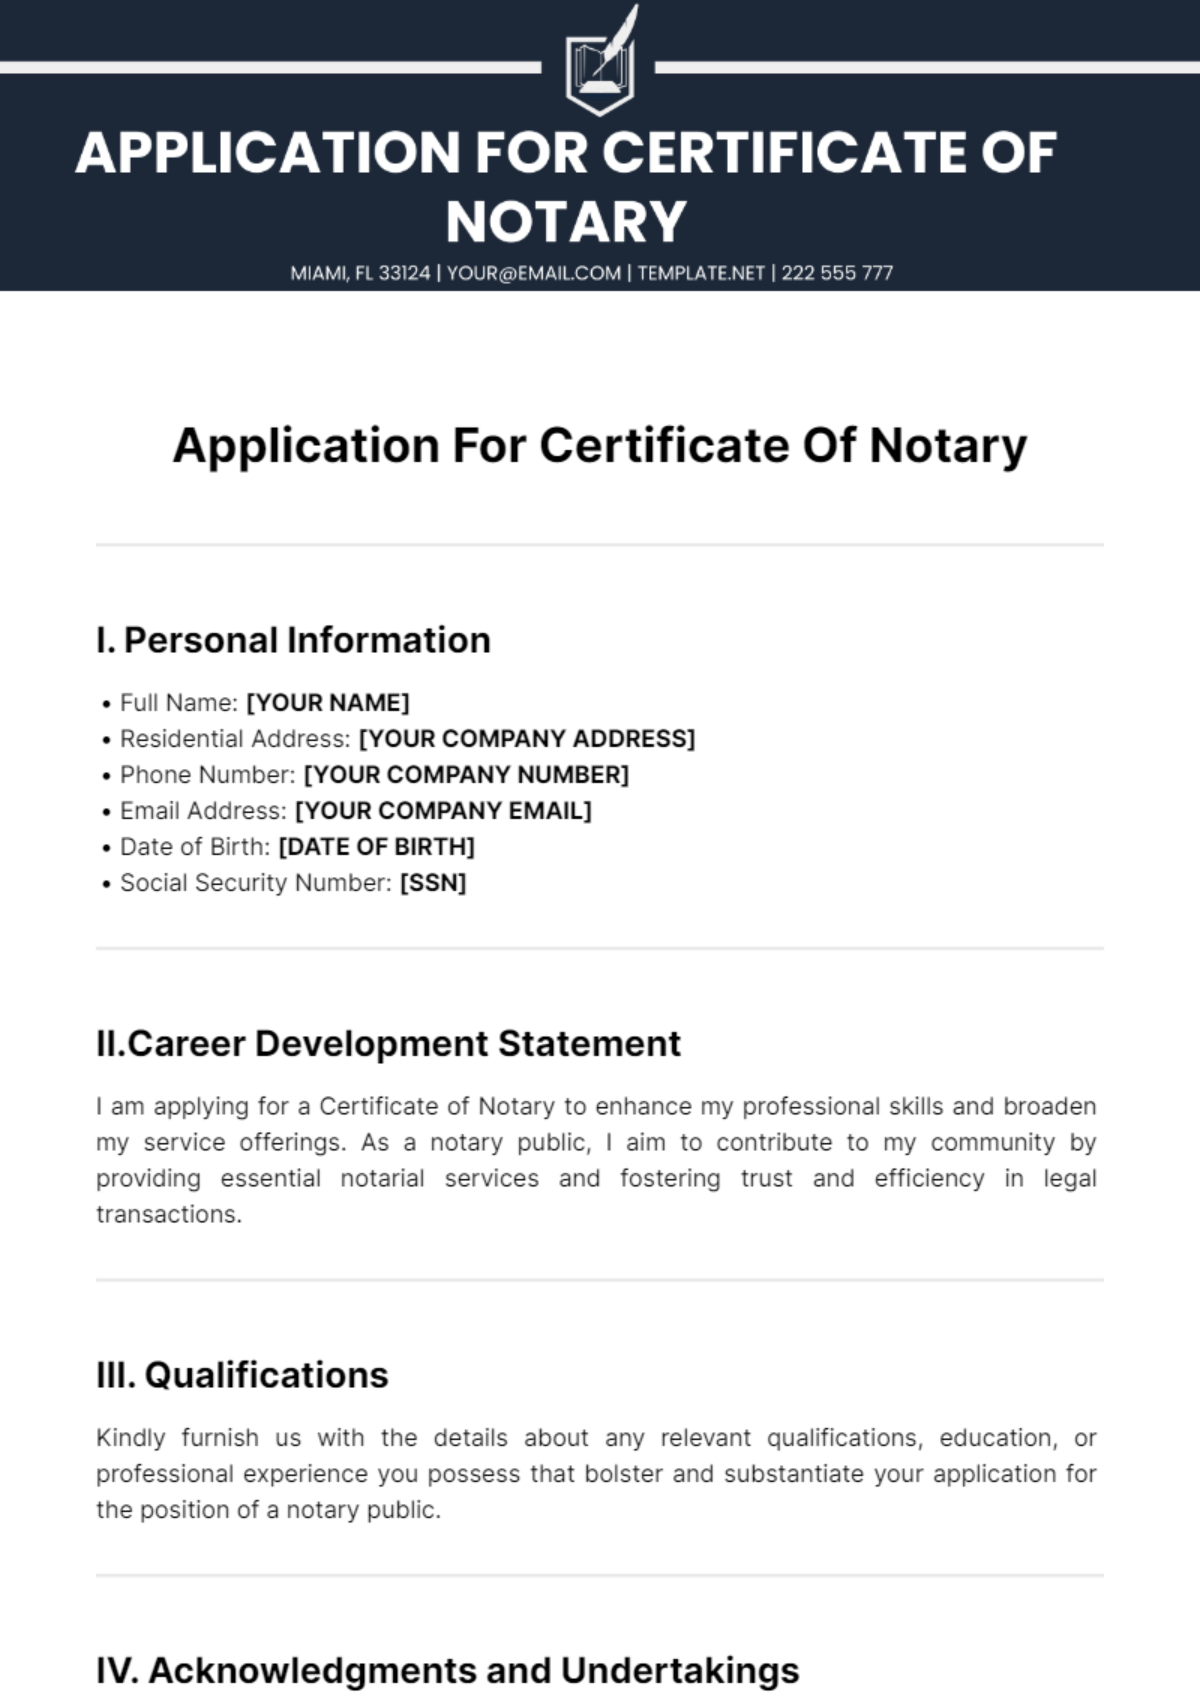 Application For Certificate Of Notary Template